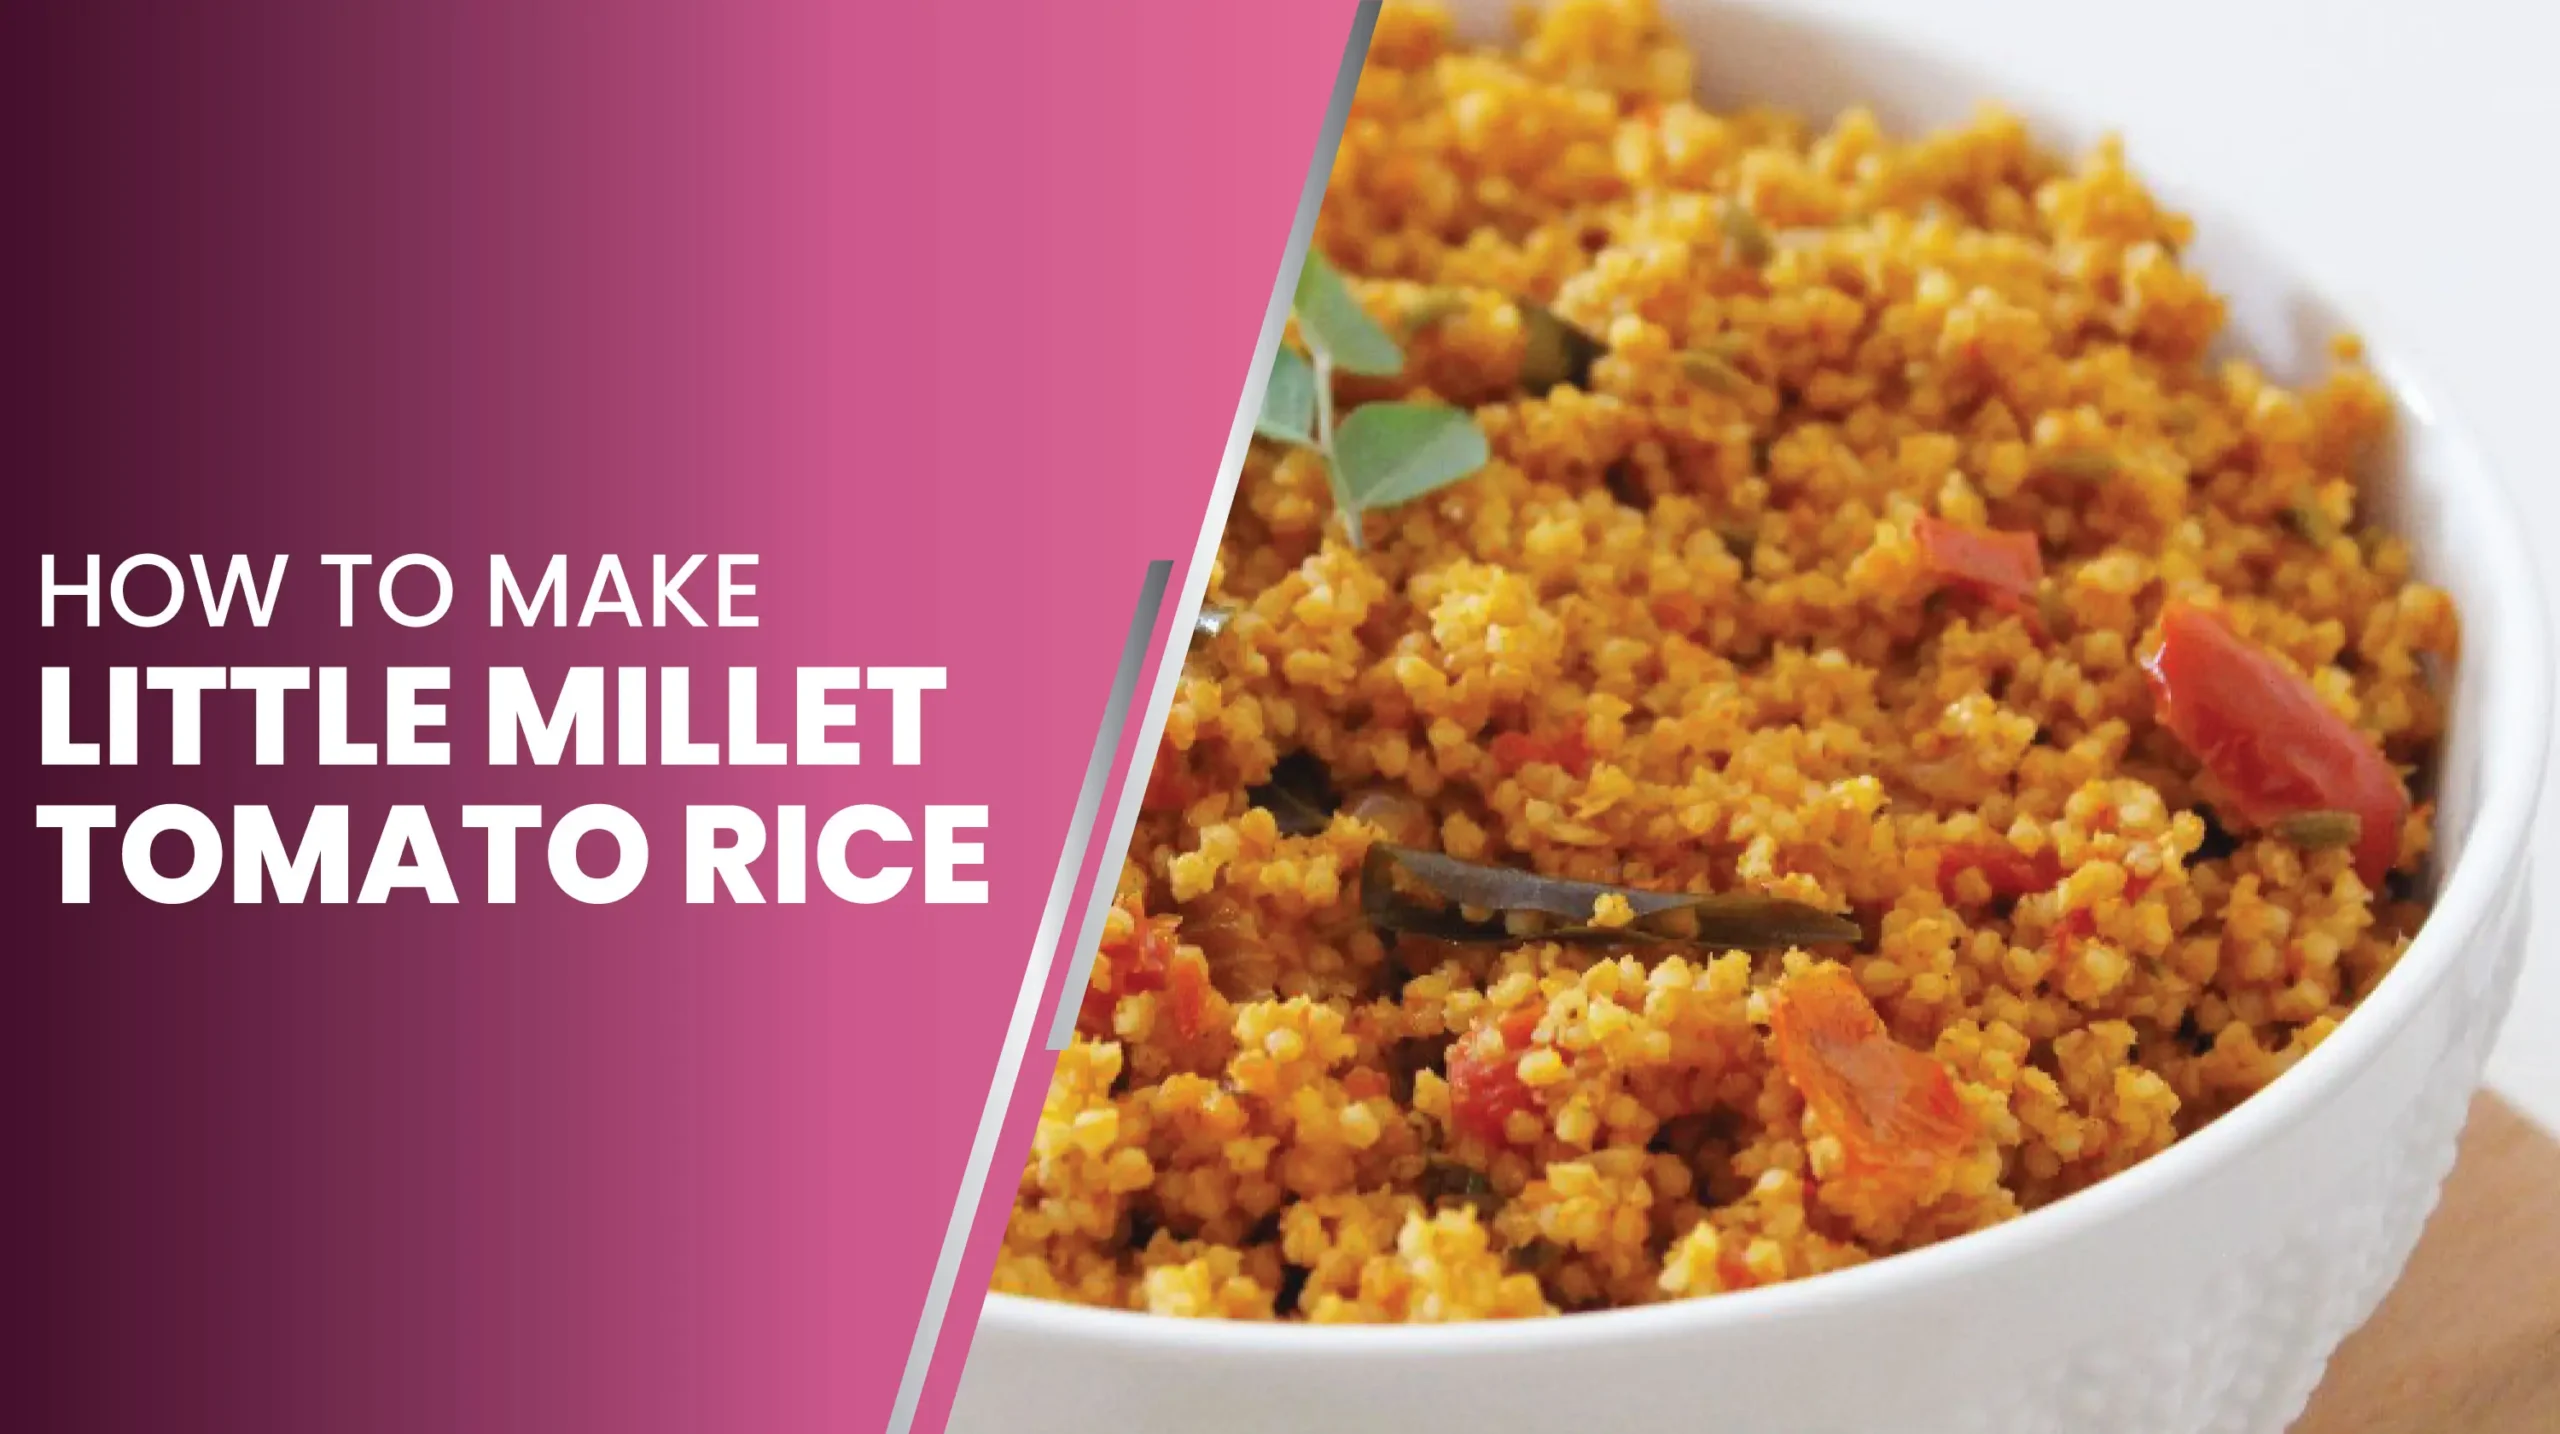 11how to make little millet tomato rice recipe